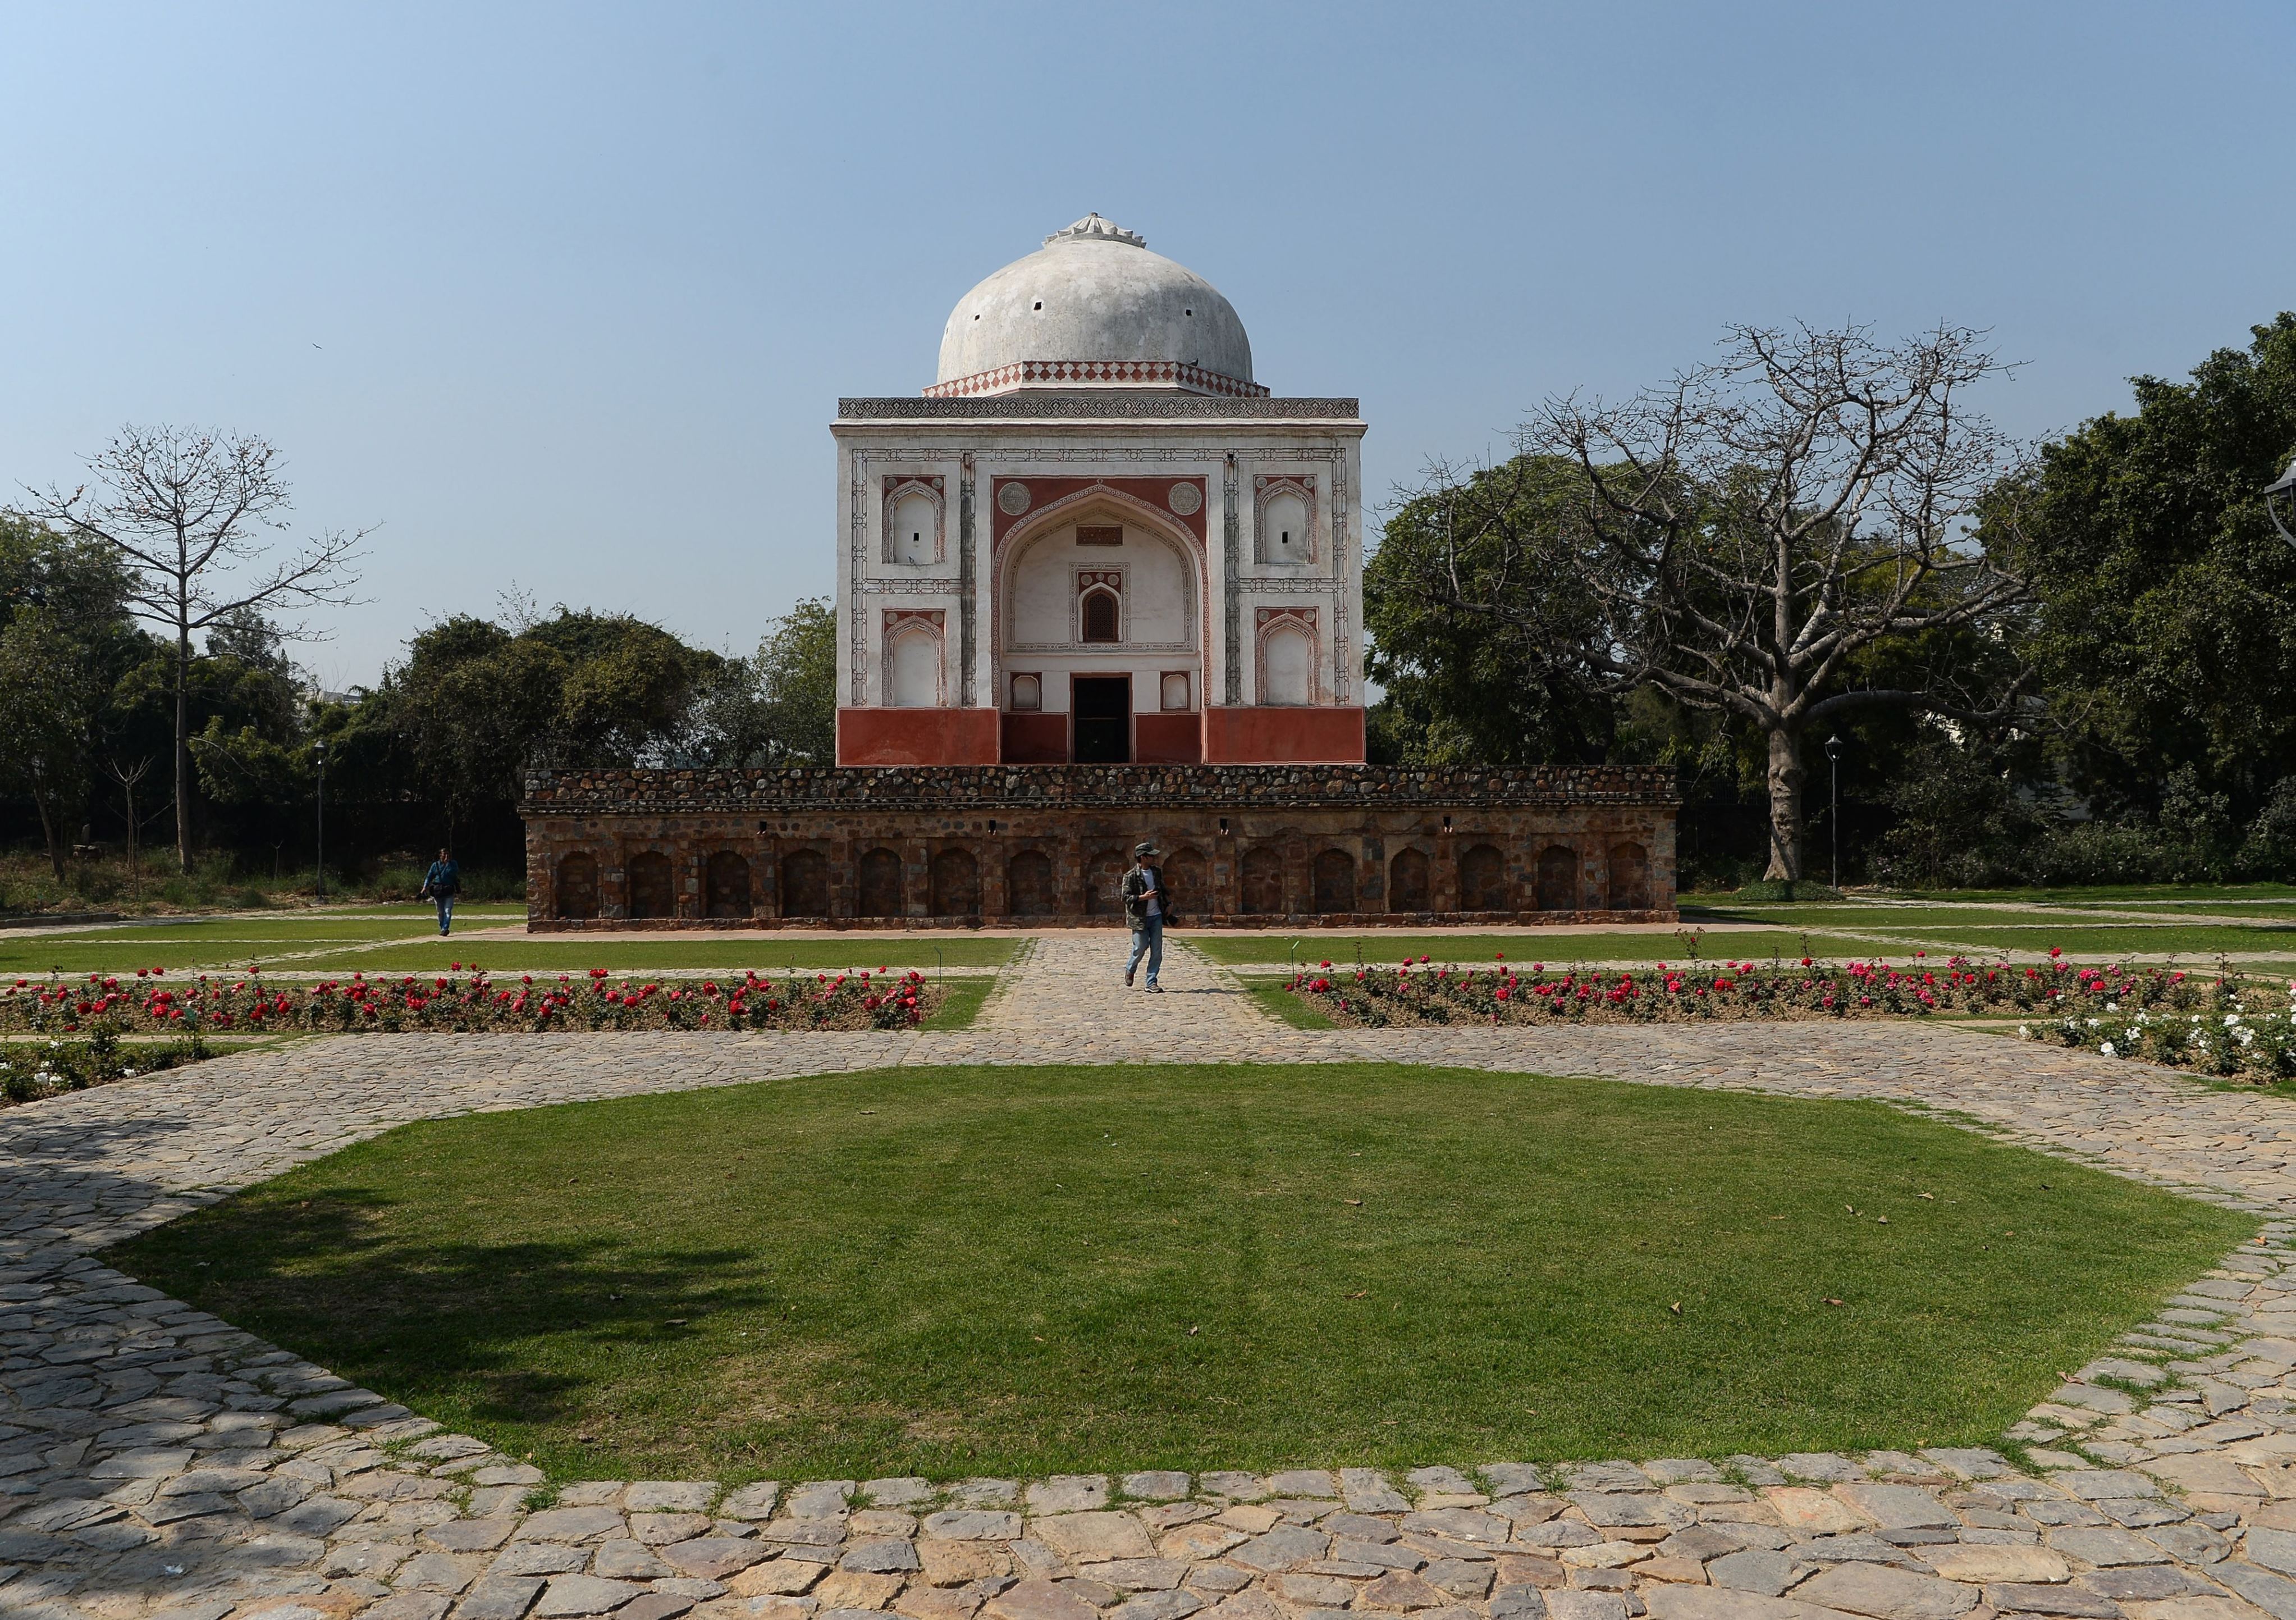 Slide 25 of 77: This photo taken on February 20, 2018 shows the renovated Lakkarwala Burj tomb in Sunder Nursery, a 16th-century heritage garden complex adjacent to Indian UNESCO site Humayun's Tomb, in New Delhi. 
A once forgotten Mughal garden in the heart of New Delhi will reopen on February 21 after years of painstaking conservation work, creating a new public park in India's sprawling and smog-choked capital. The 90-acre (36-hectare) garden will be formally opened by the Aga Khan, whose Trust for Culture has helped recreate the classical garden and restore its crumbling 16th-century monuments.
 / AFP PHOTO / Sajjad HUSSAIN        (Photo credit should read SAJJAD HUSSAIN/AFP/Getty Images)